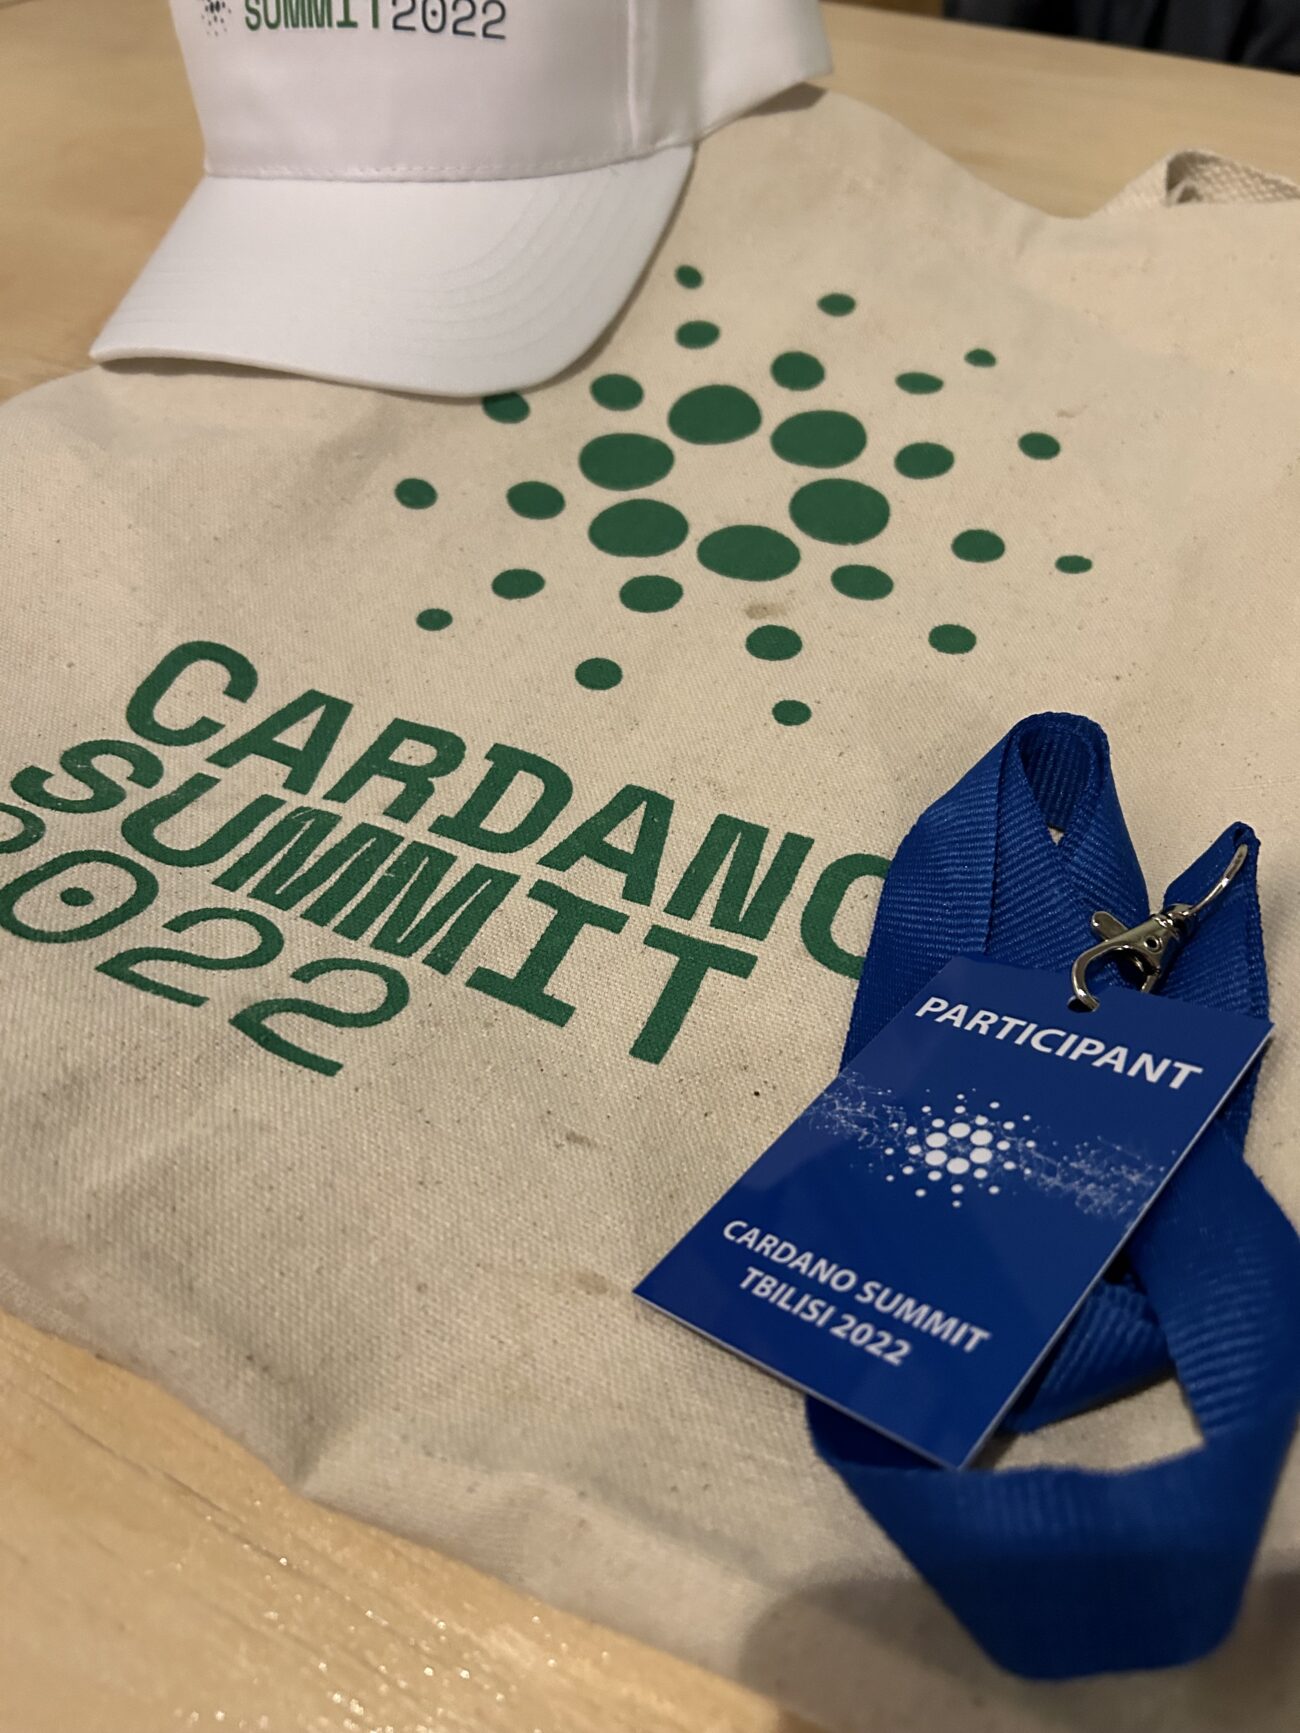 Go to the Cardano Summit. Trembling on my feet and knowing where I stand in a world 